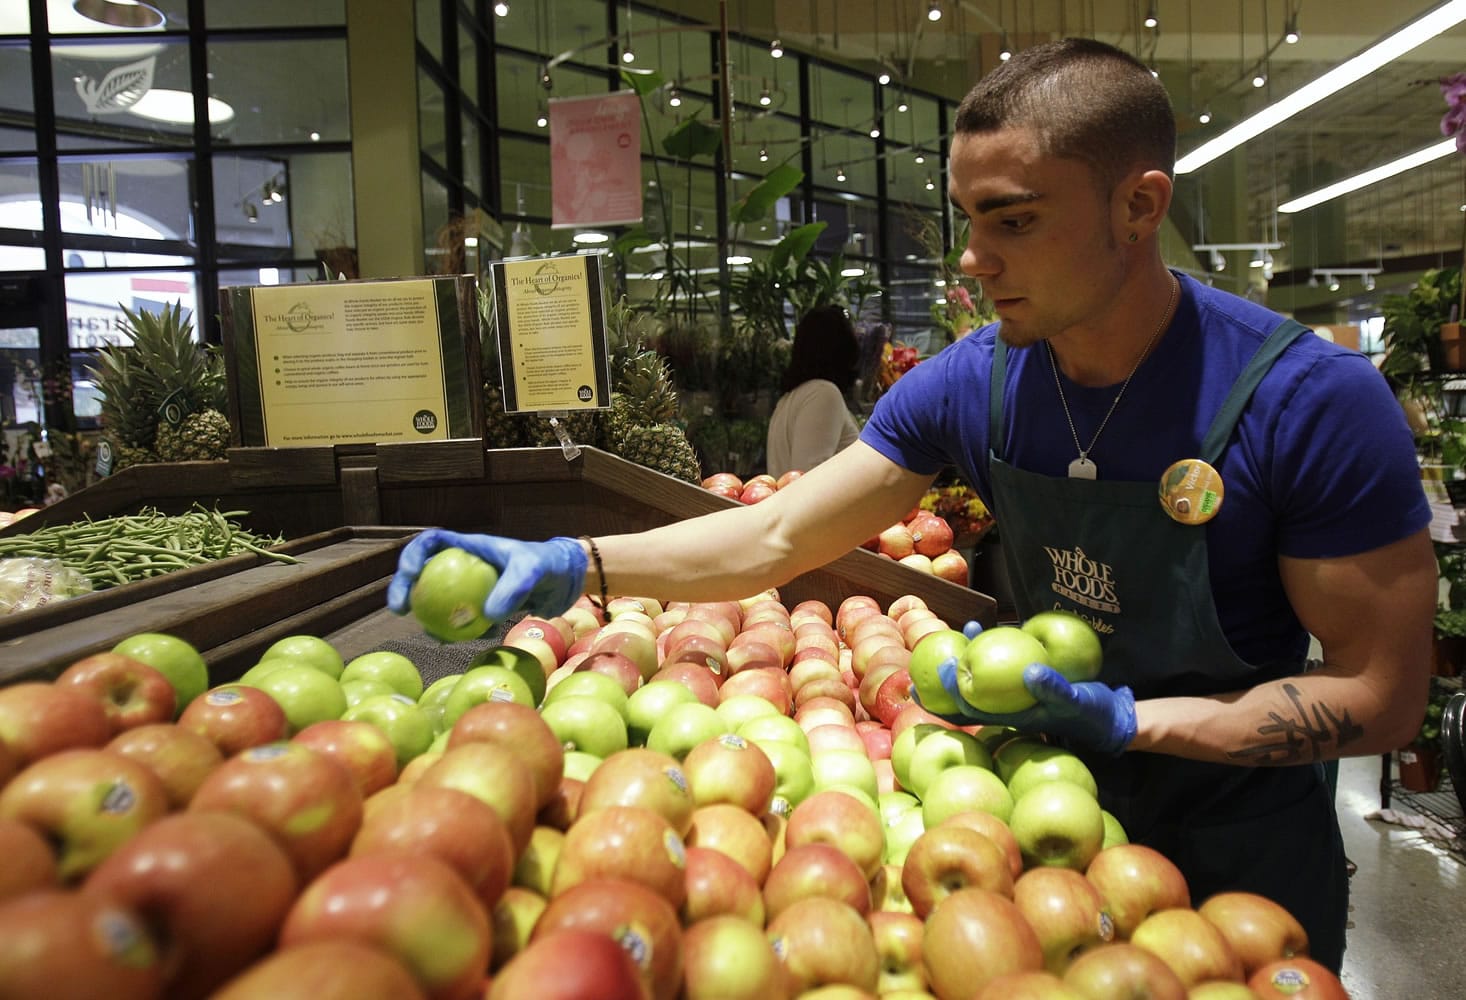 Victor Hernandez stocks apples in the produce section at Whole Foods in Coral Gables, Fla.